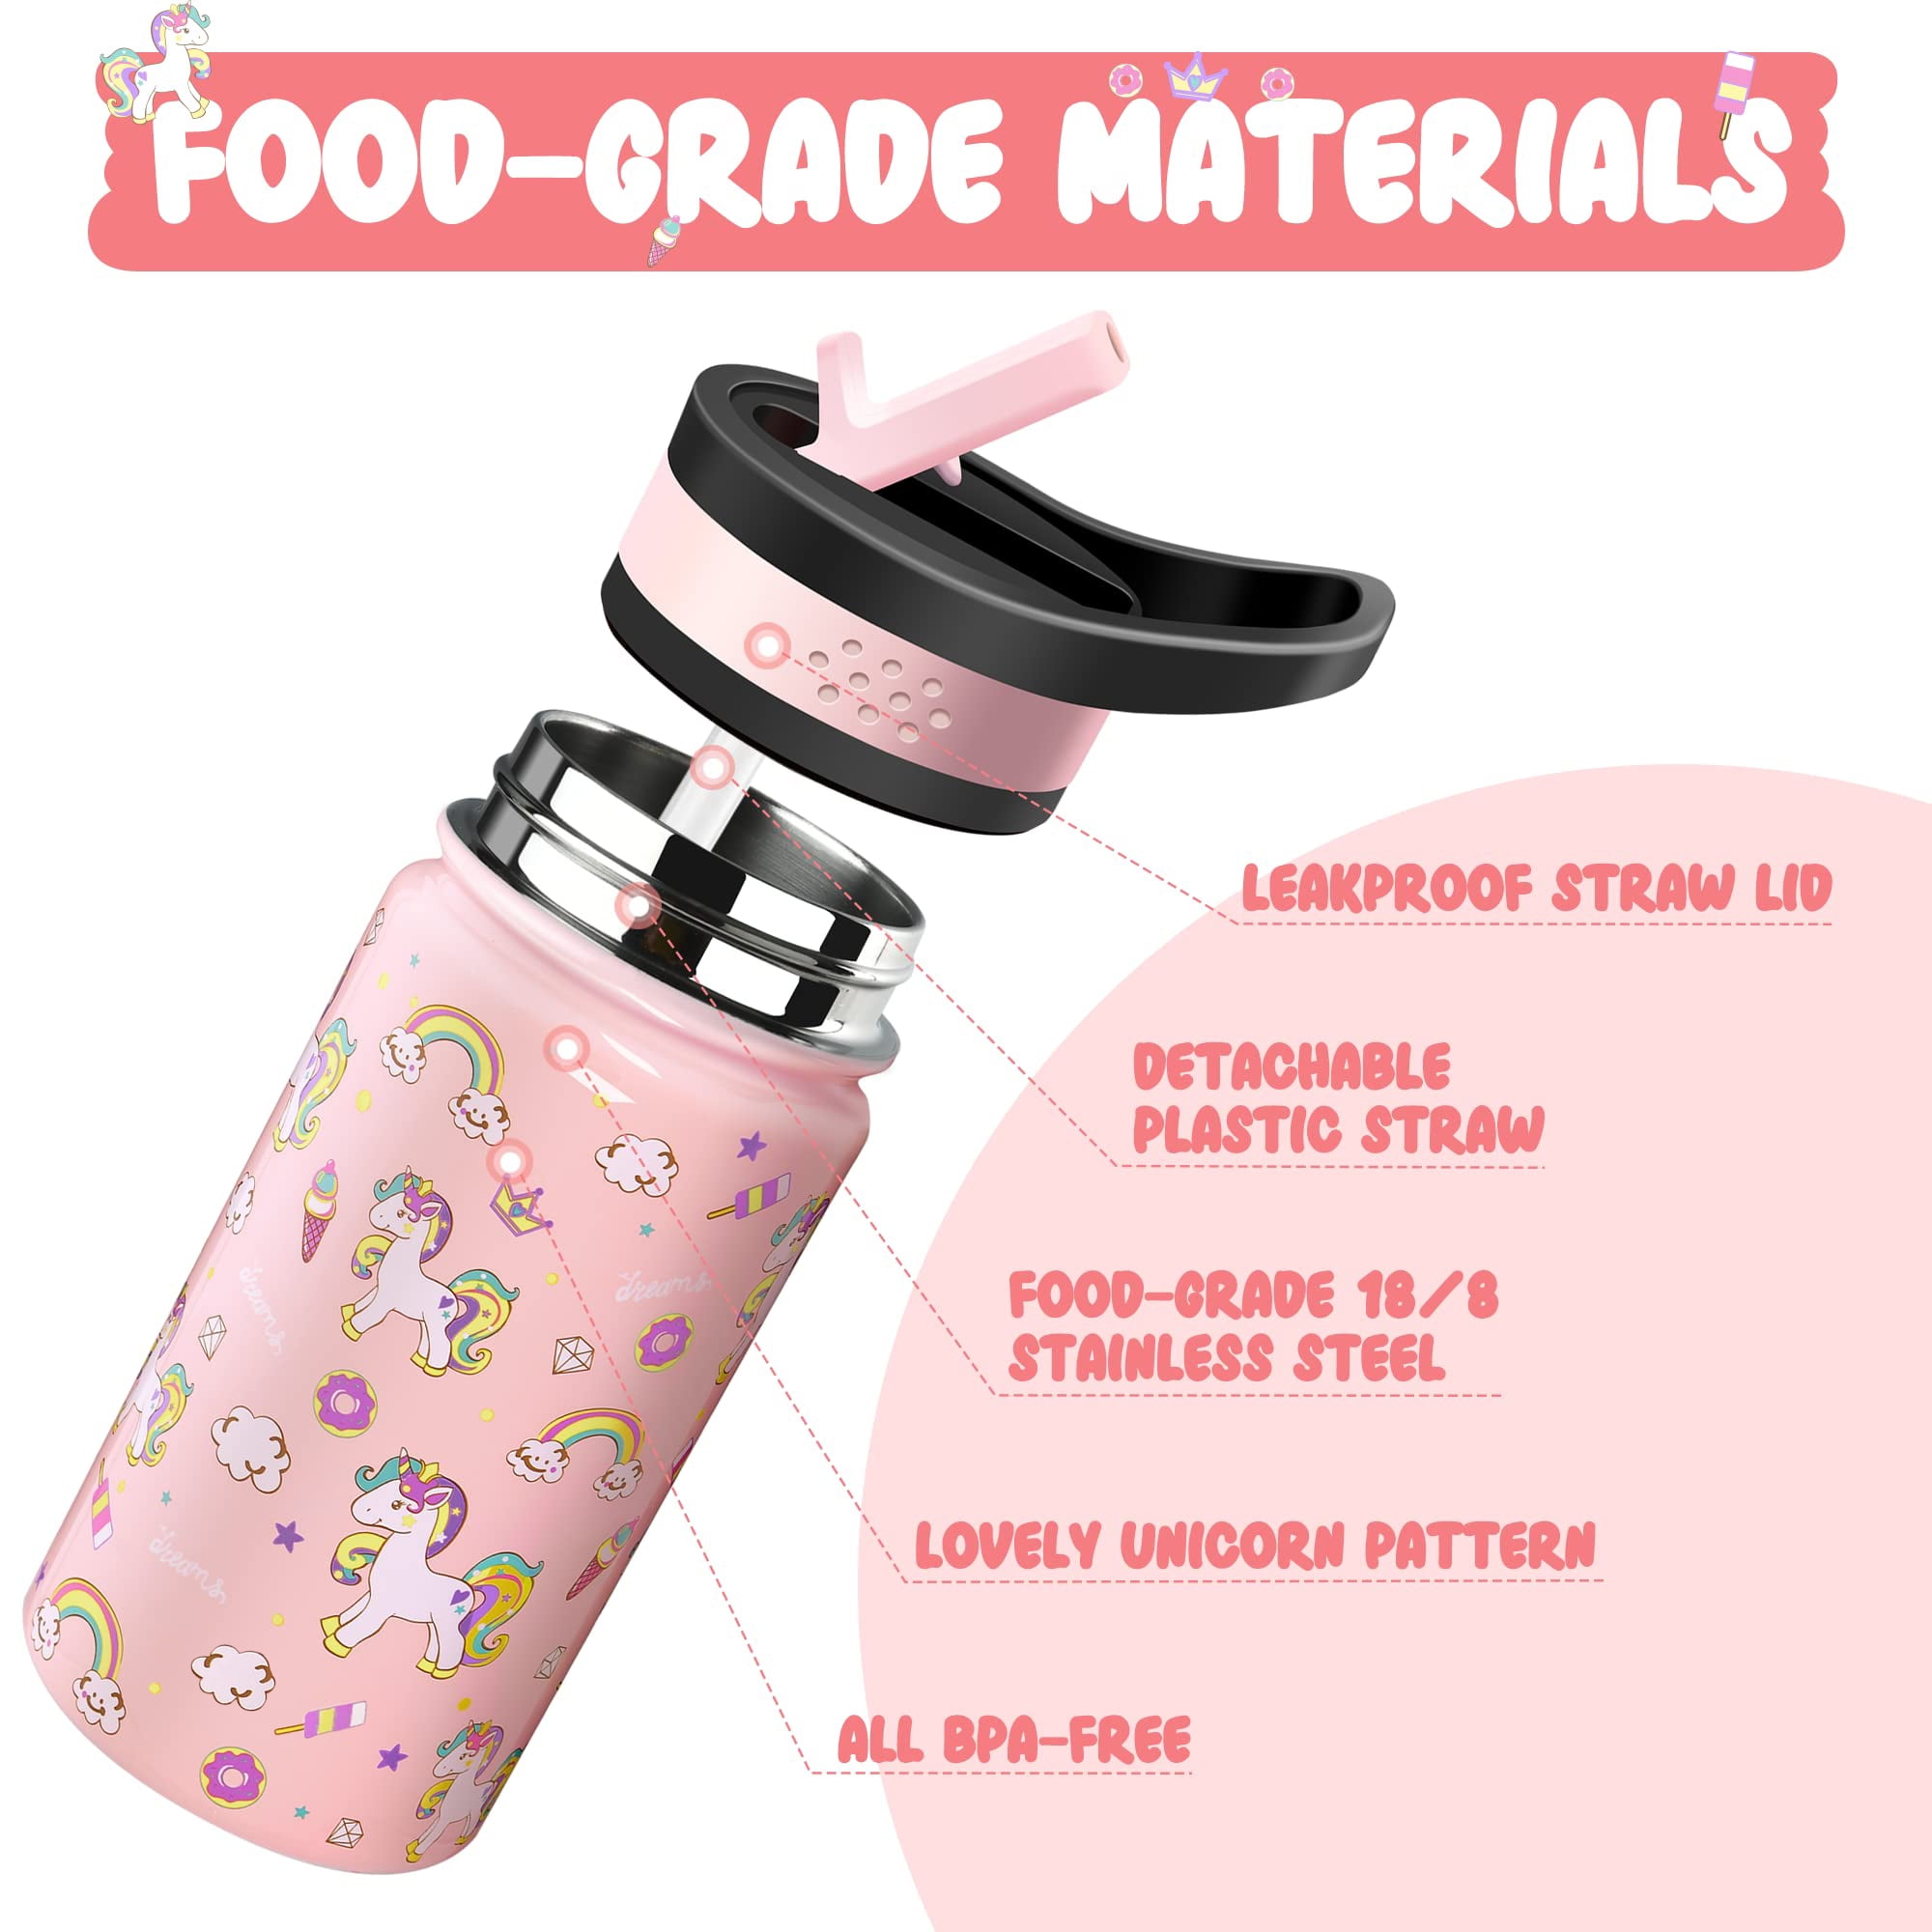 12 oz Insulated Kids Water Bottle for Boy Girl with Straw/Chug/  One-Click-Open Lids Strainer Stainless Steel Water Bottles Double Wall  Vacuum Wide